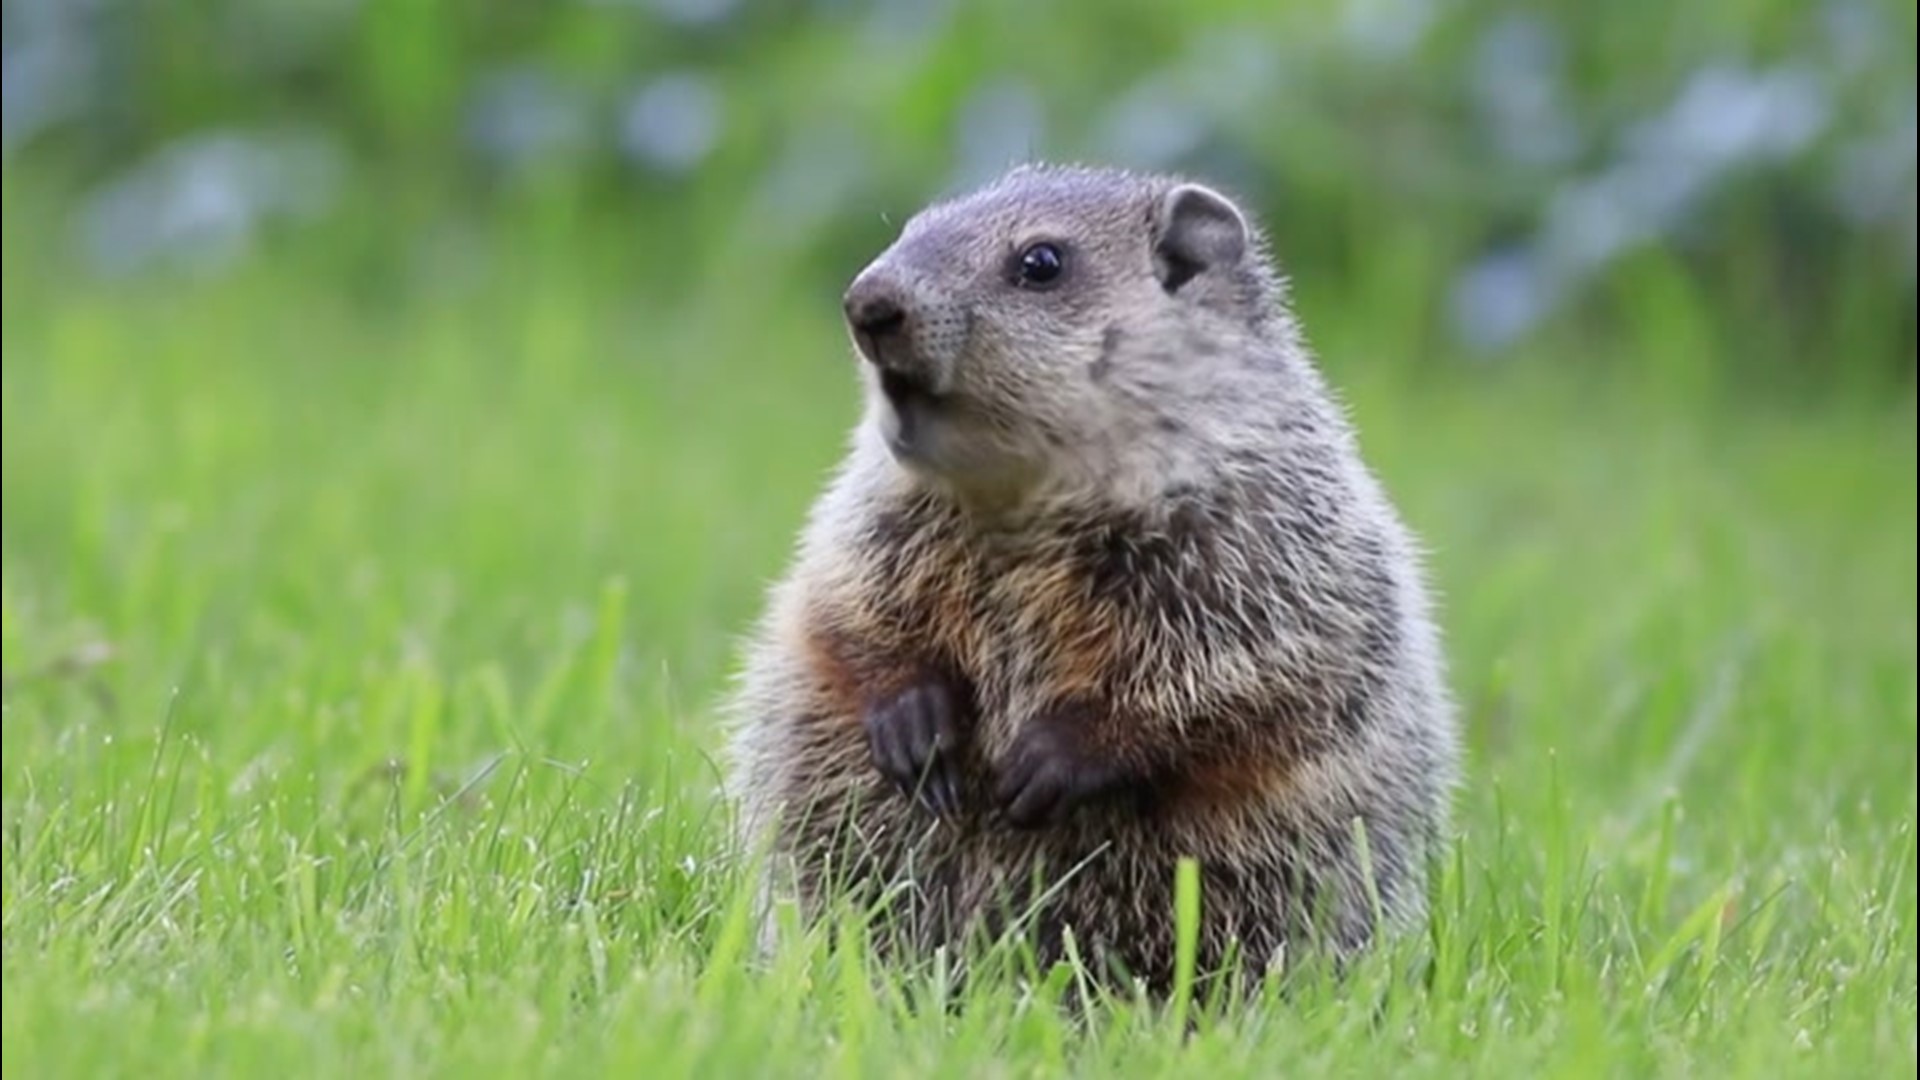 How did we come to celebrate our favorite weather-predicting rodent on Groundhog Day? It actually has a tie-in with astronomy and the time of year.